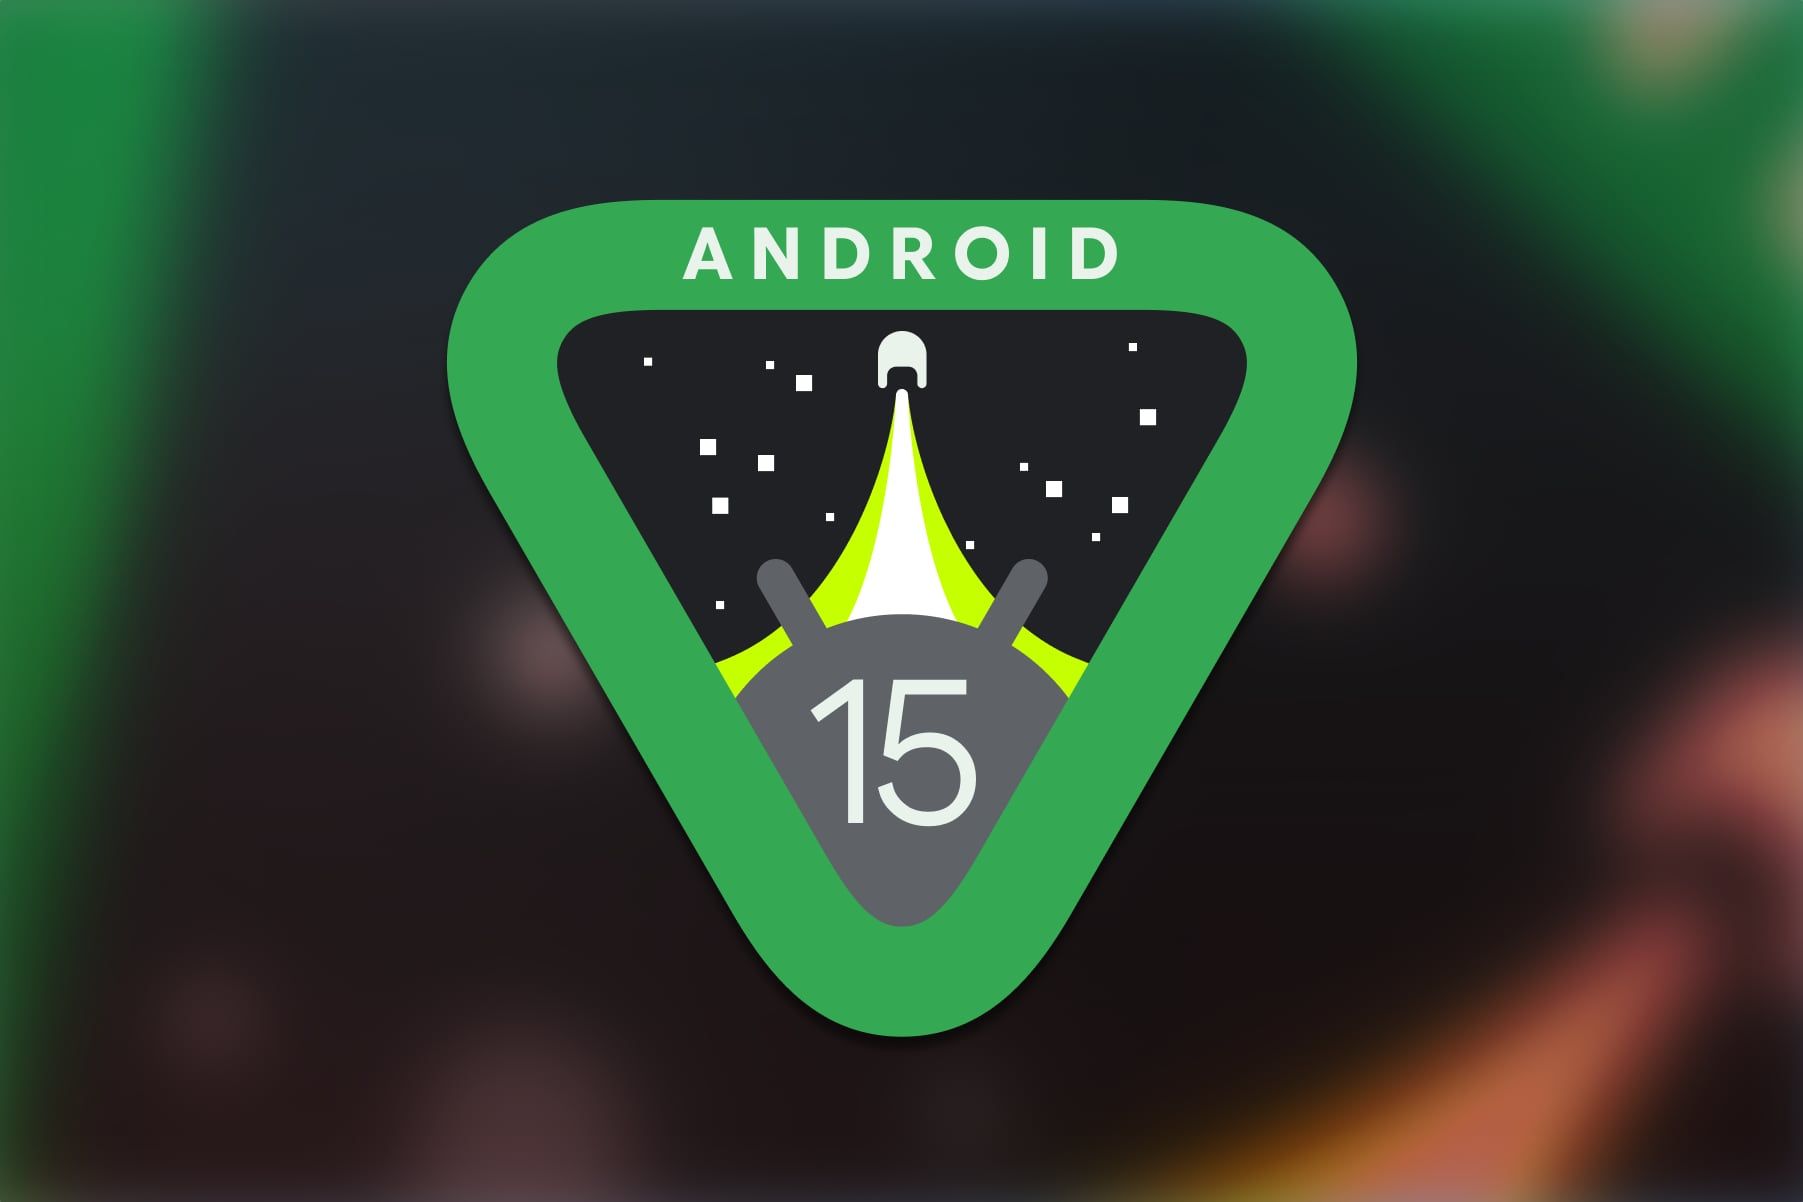 Android 15 official badge